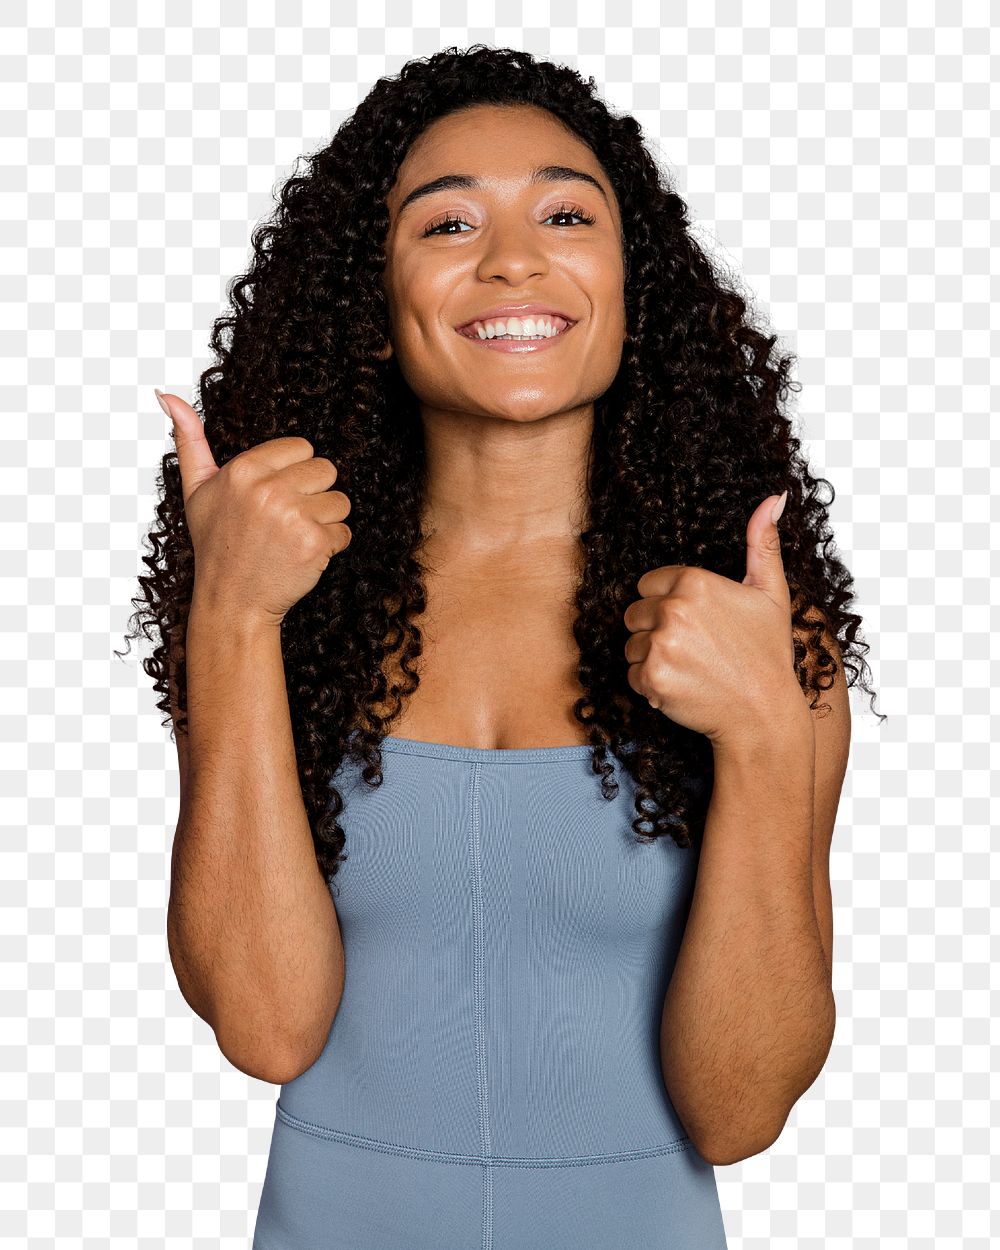 Thumbs up png sticker, transparent background